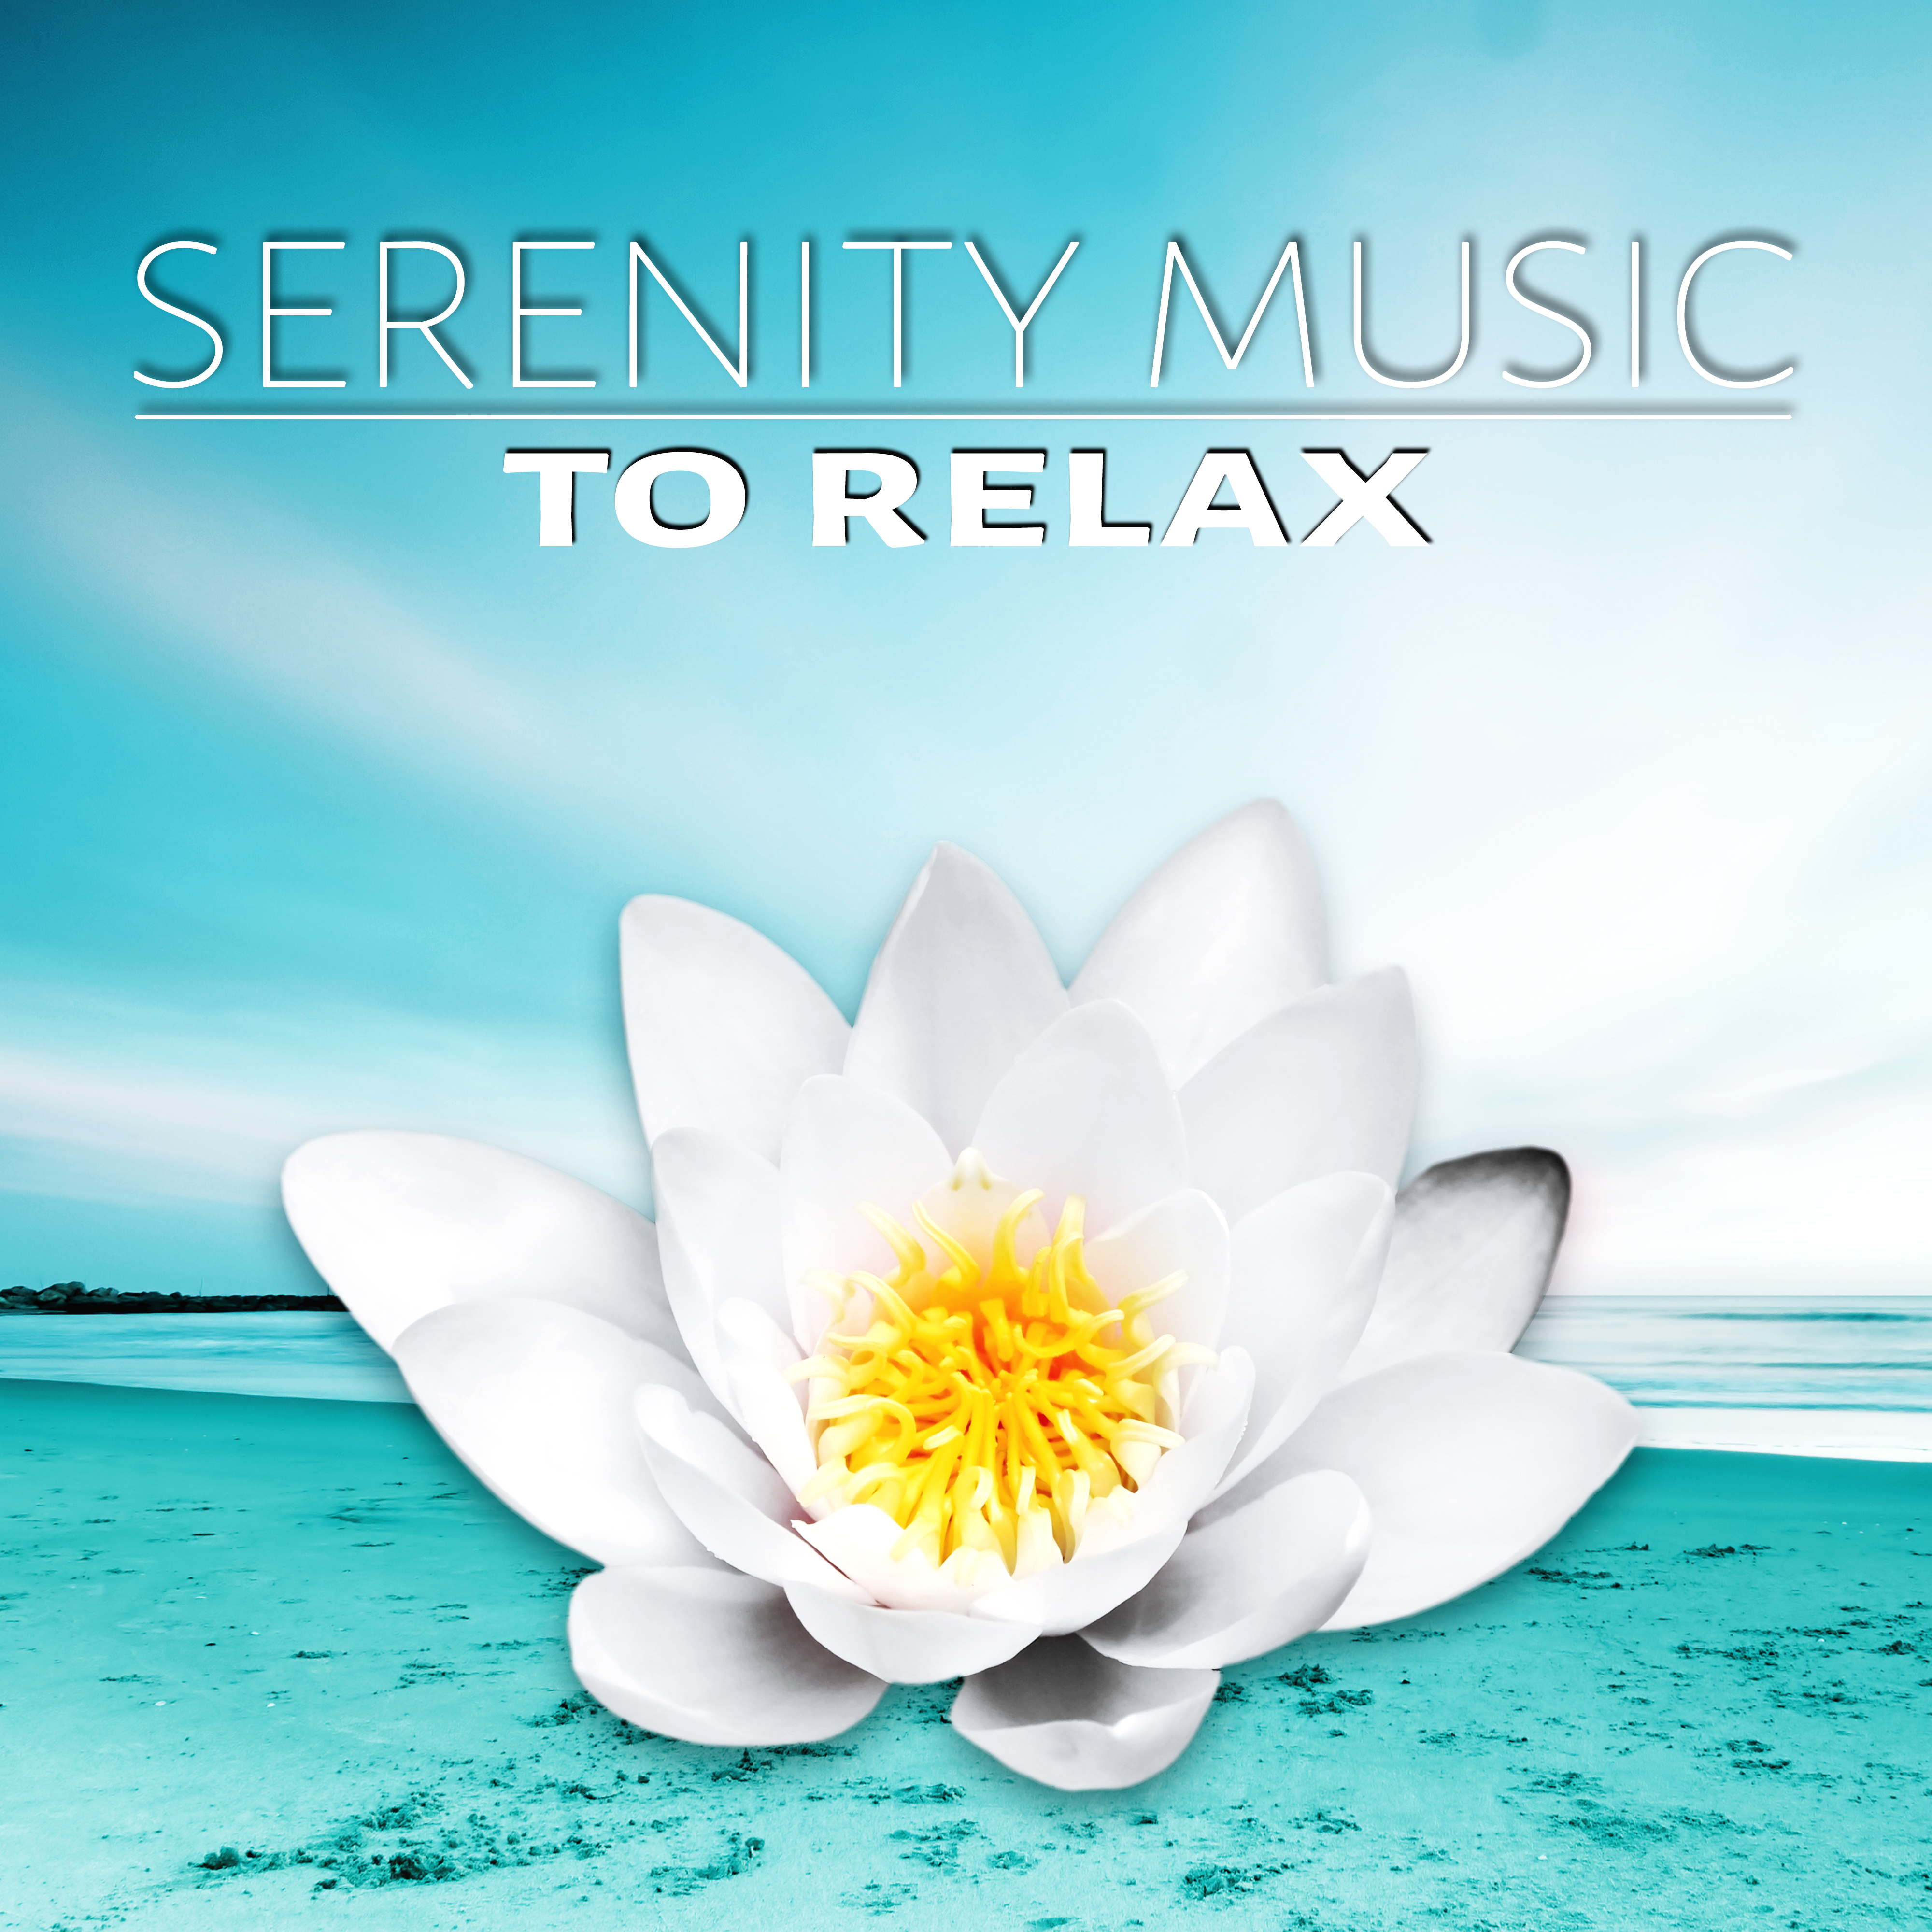 Serenity Music to Relax - Beauty Salon Music, Background Music for Spa Treatments, Soothing Sounds, Sensual Massage Music, Gentle Touch